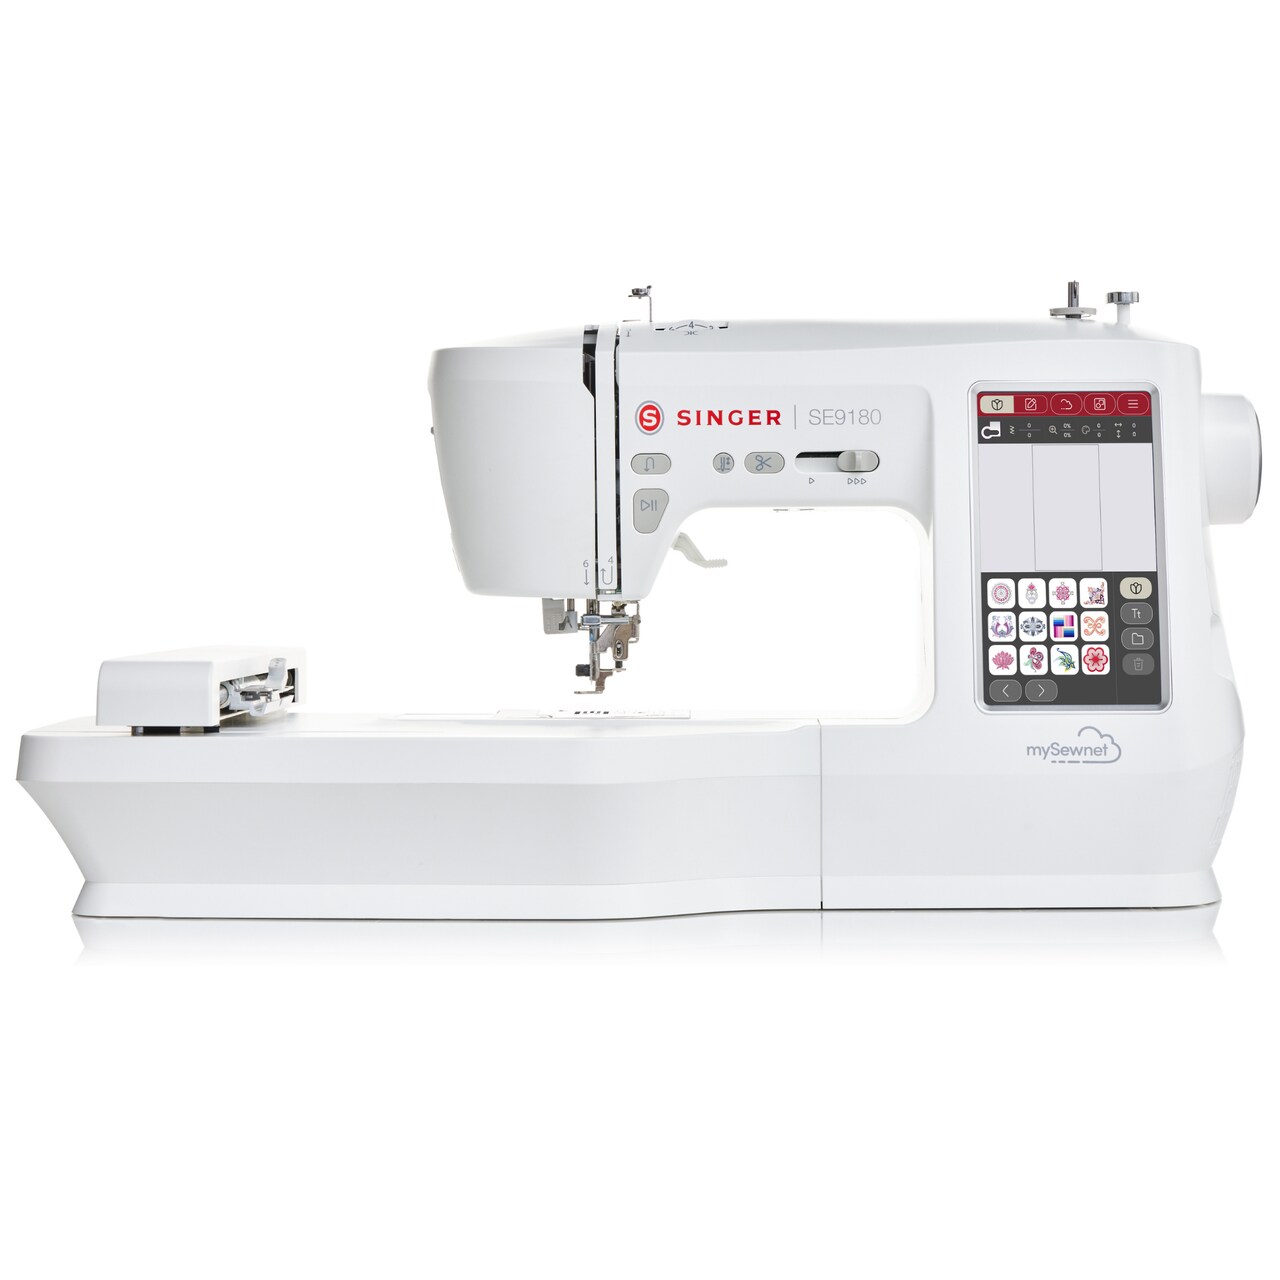 Meet the NEW SINGER® SE9180 Embroidery Machine